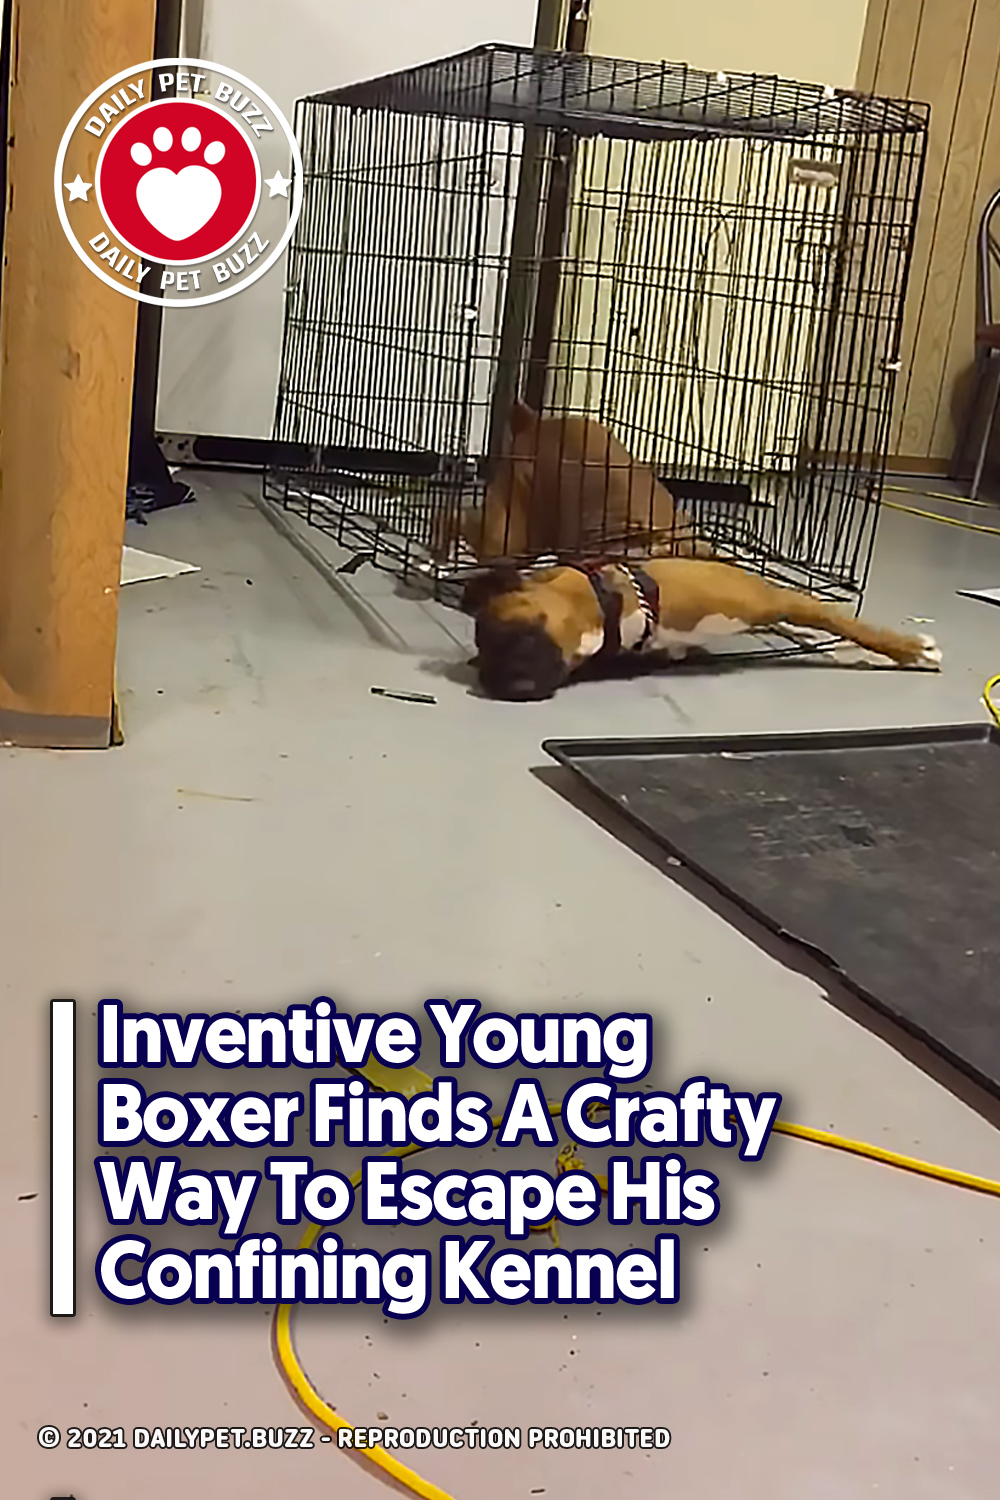 Inventive Young Boxer Finds A Crafty Way To Escape His Confining Kennel